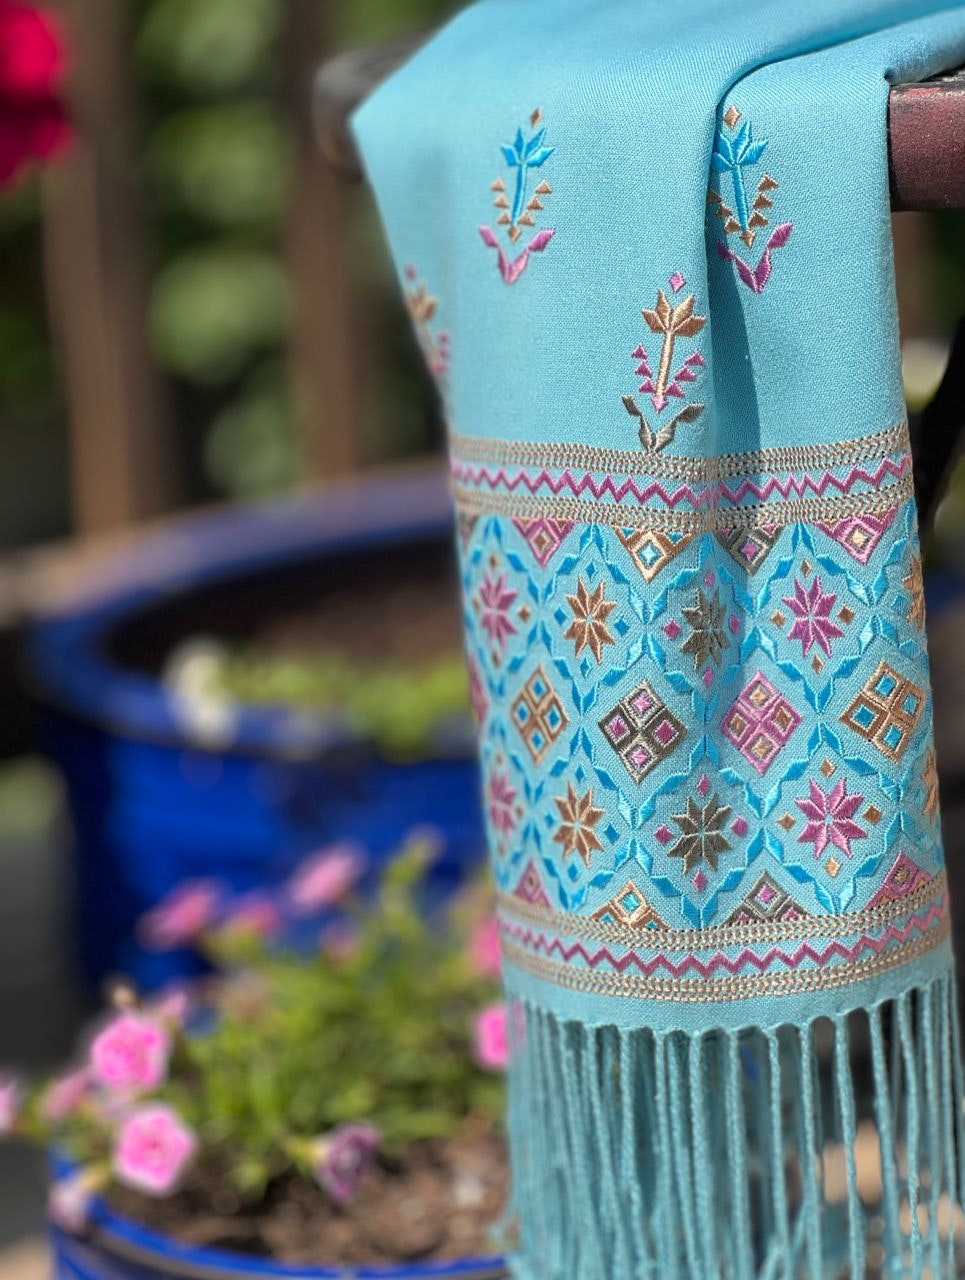 Blue embroidered shawl against a background of flowering plants in pots